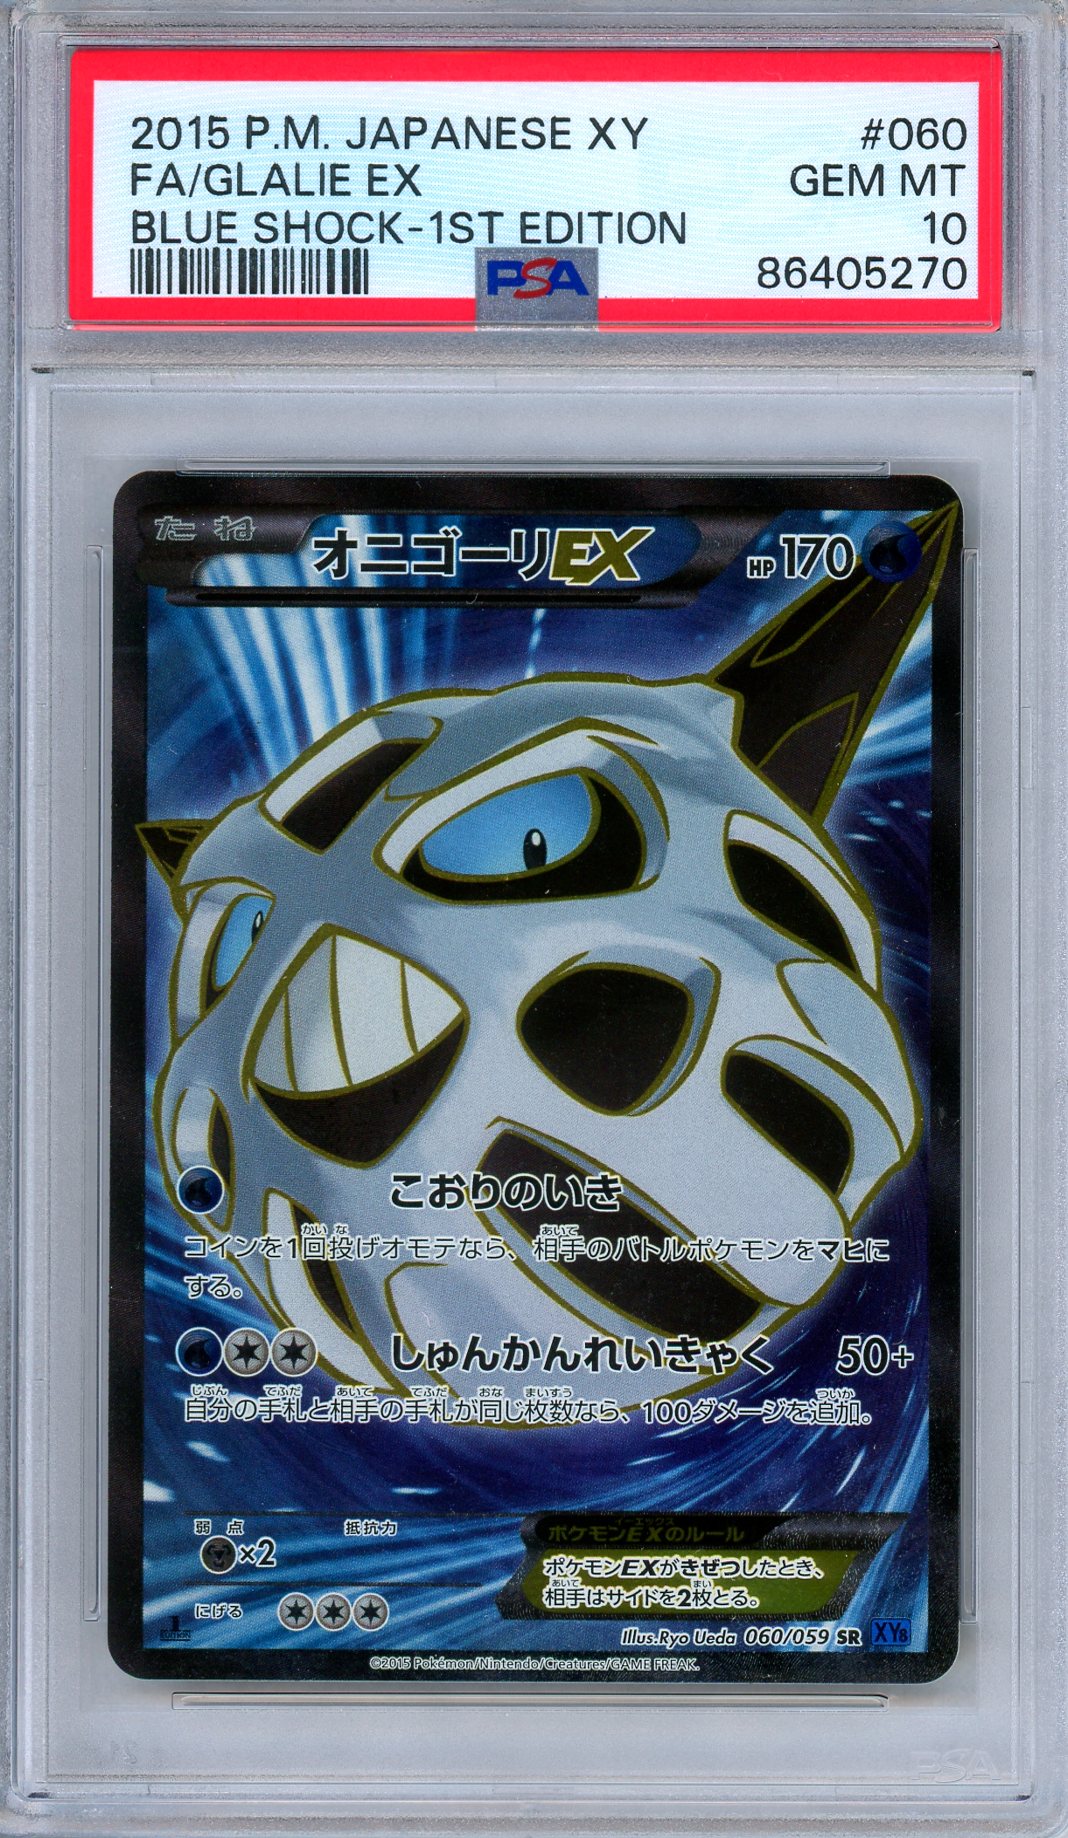 PSA Graded Cards – Isle Collectibles